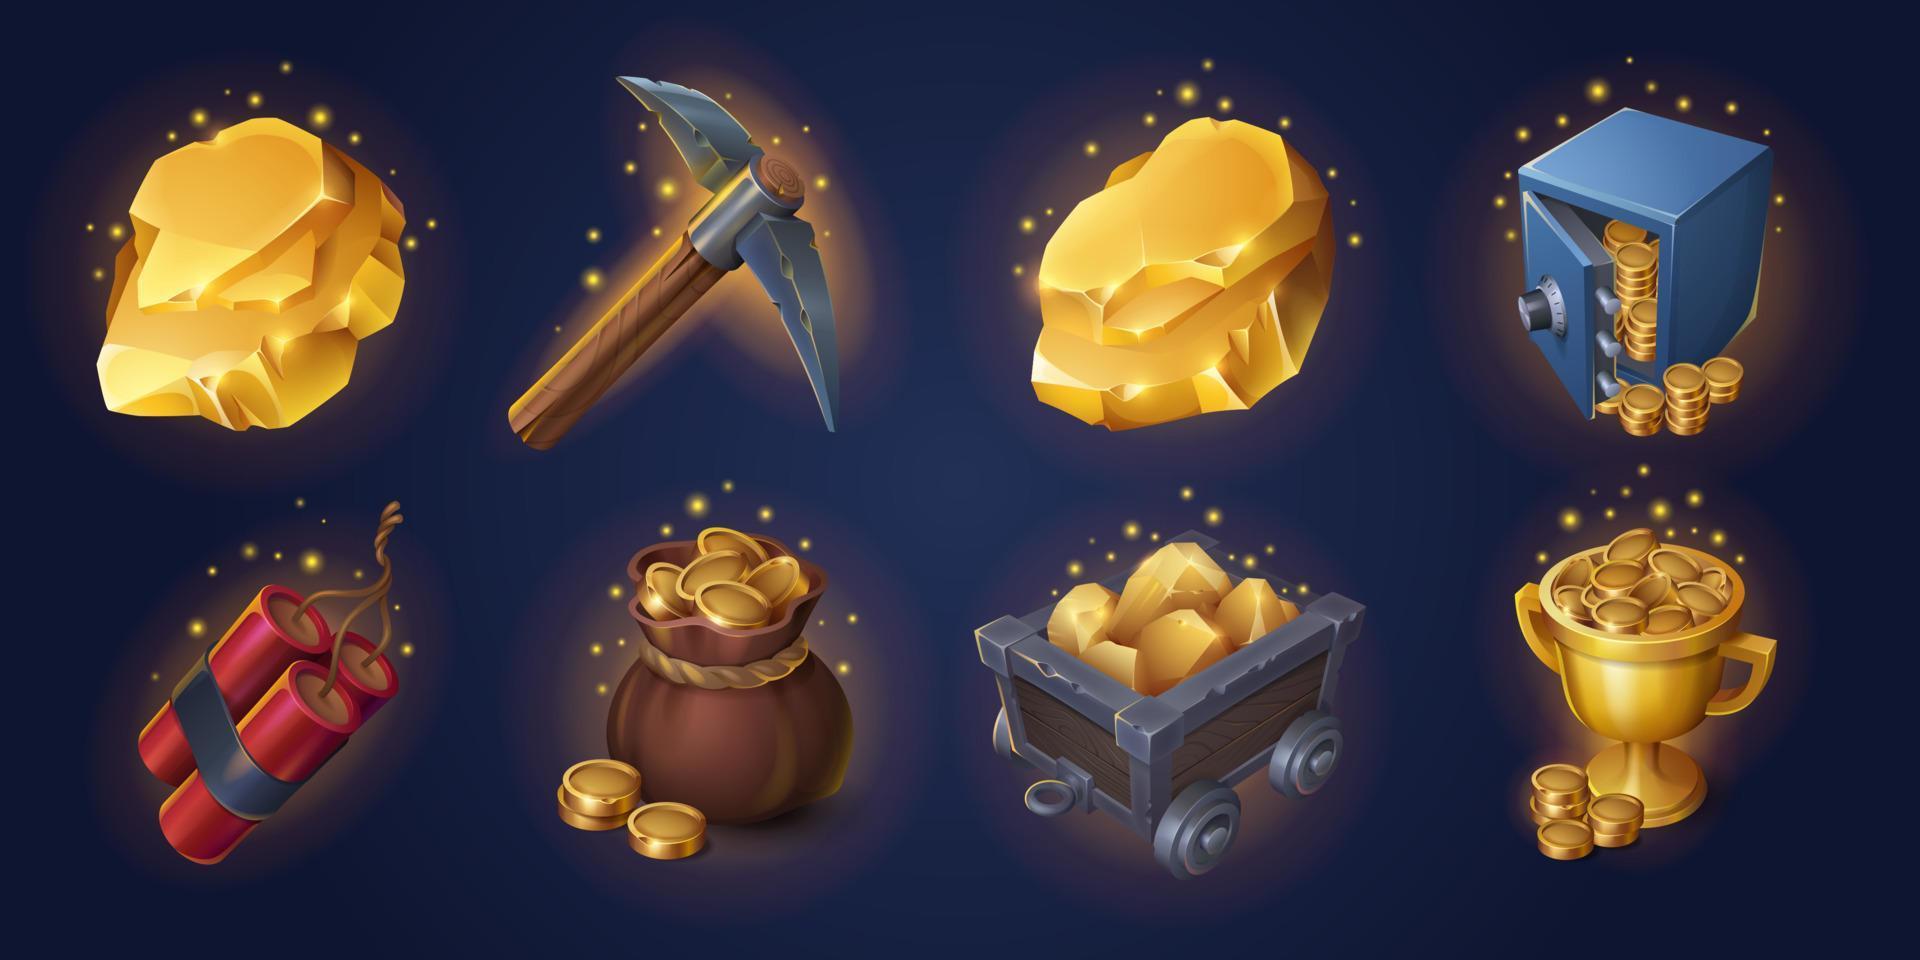 Gold mining game props collection on background vector